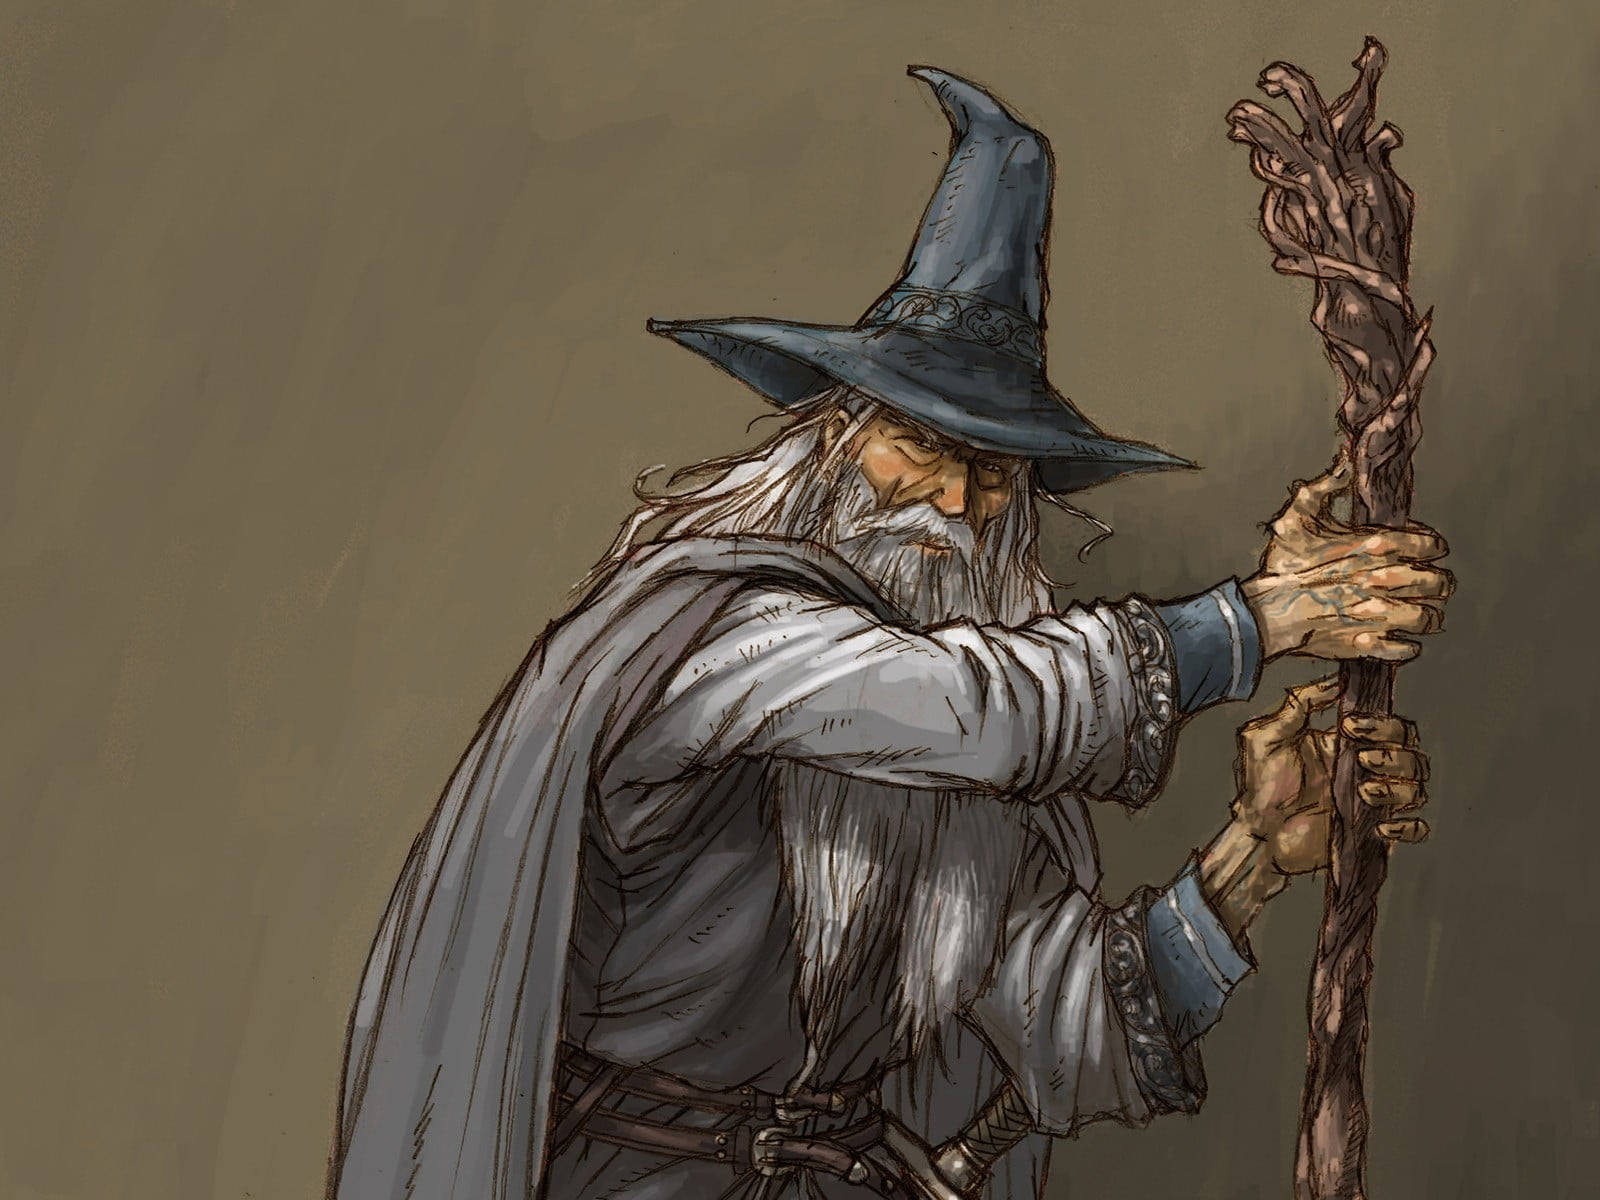 wizard holding cane illustration, Gandalf, artwork, The Lord of the Rings, wizard